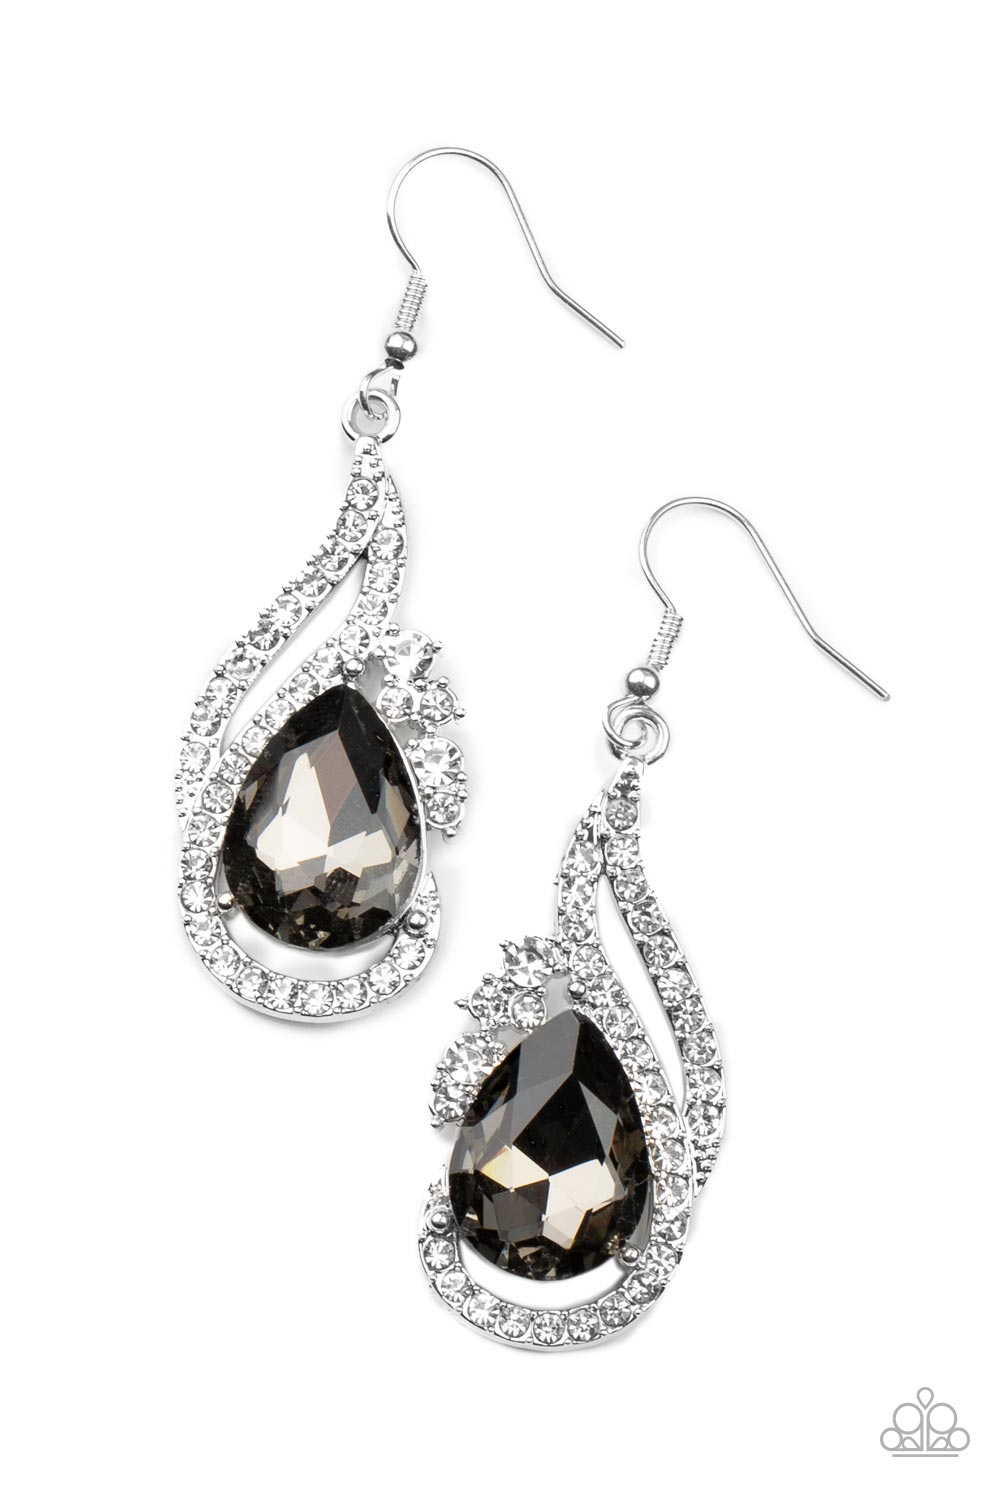 Dancefloor Diva Silver and White Rhinestone Earrings - Paparazzi Accessories- lightbox - CarasShop.com - $5 Jewelry by Cara Jewels